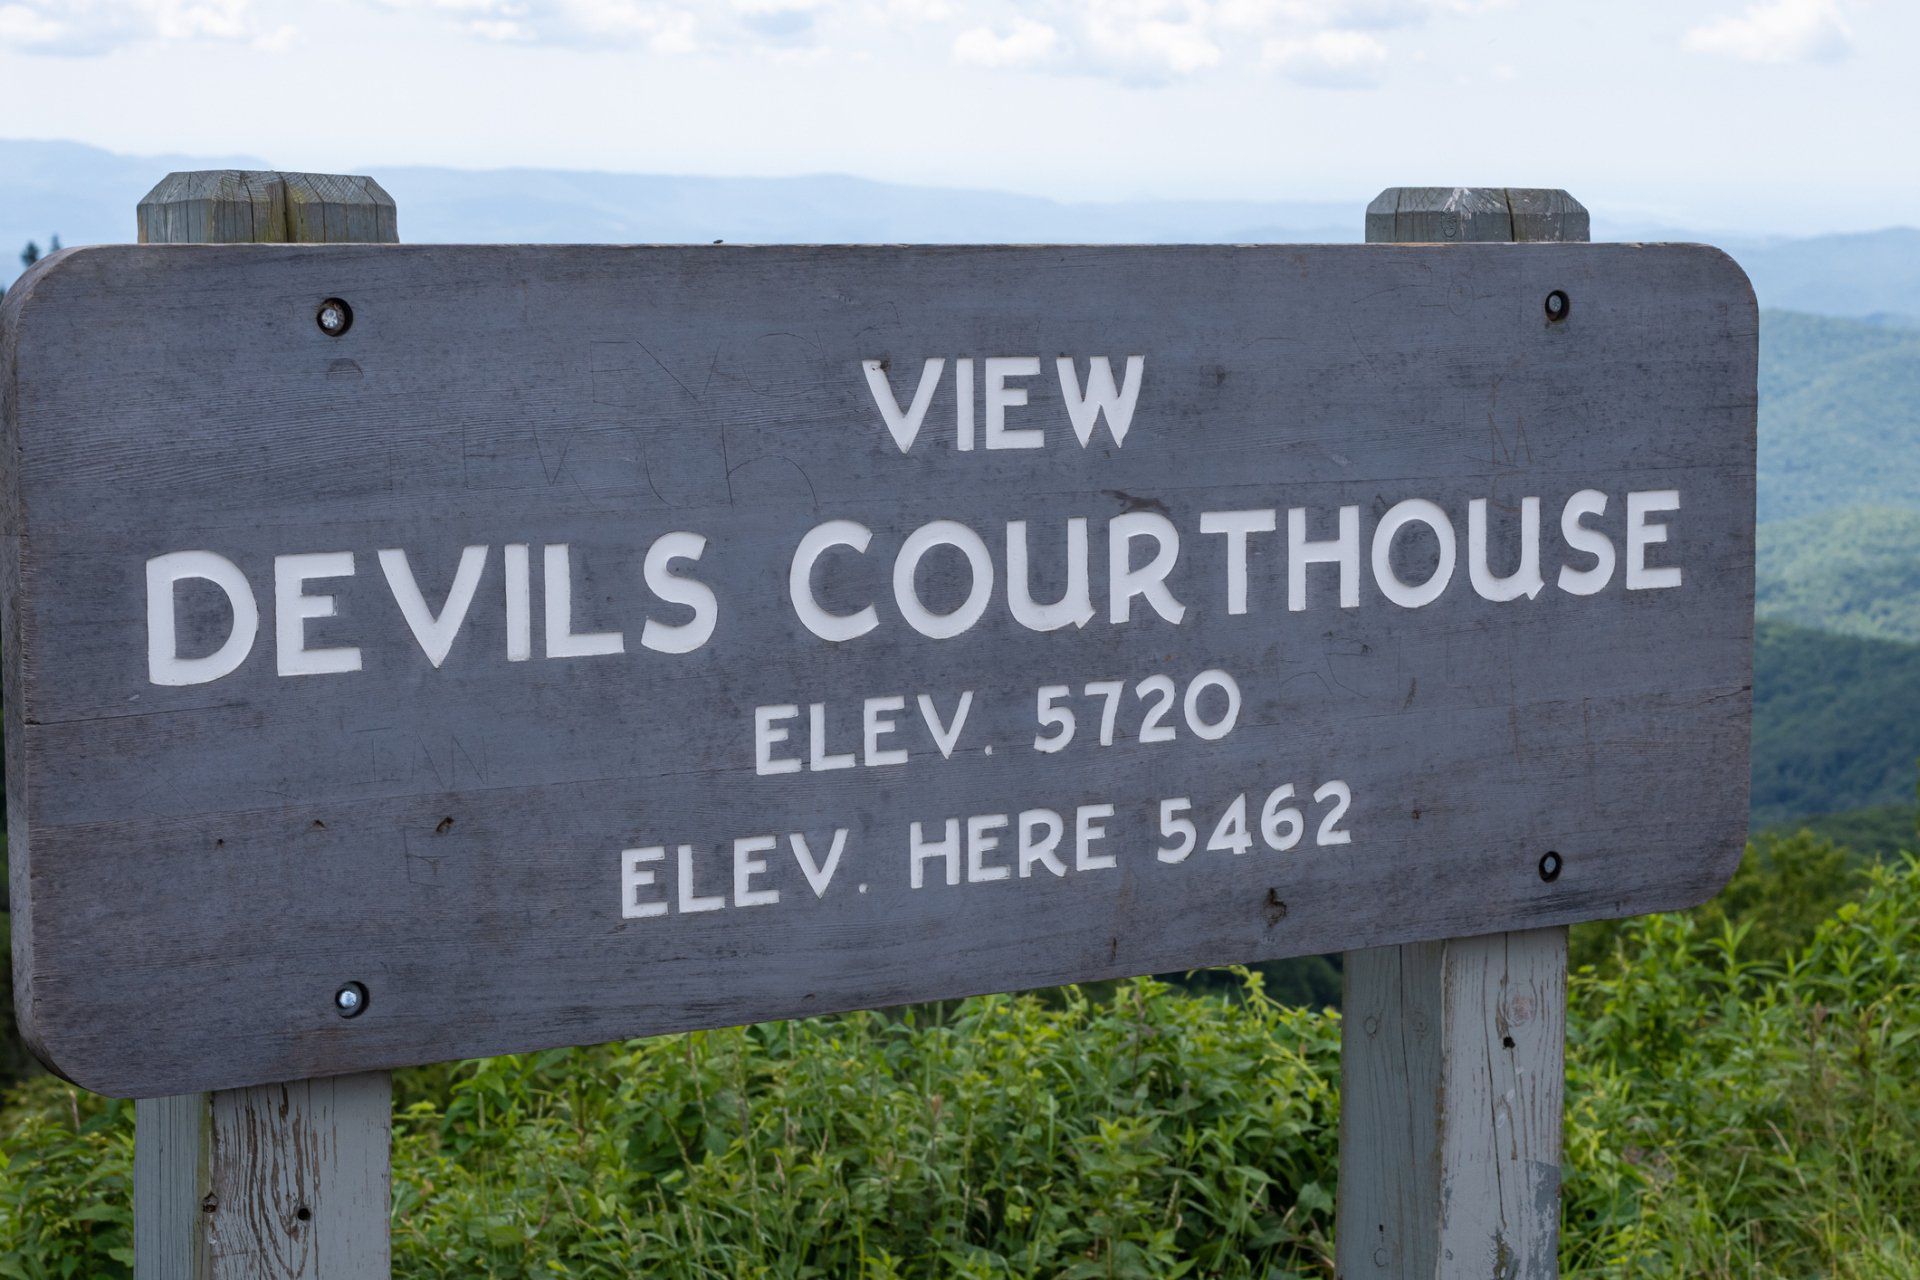 a wooden sign says view devils courthouse elev 5720 elev here 5462